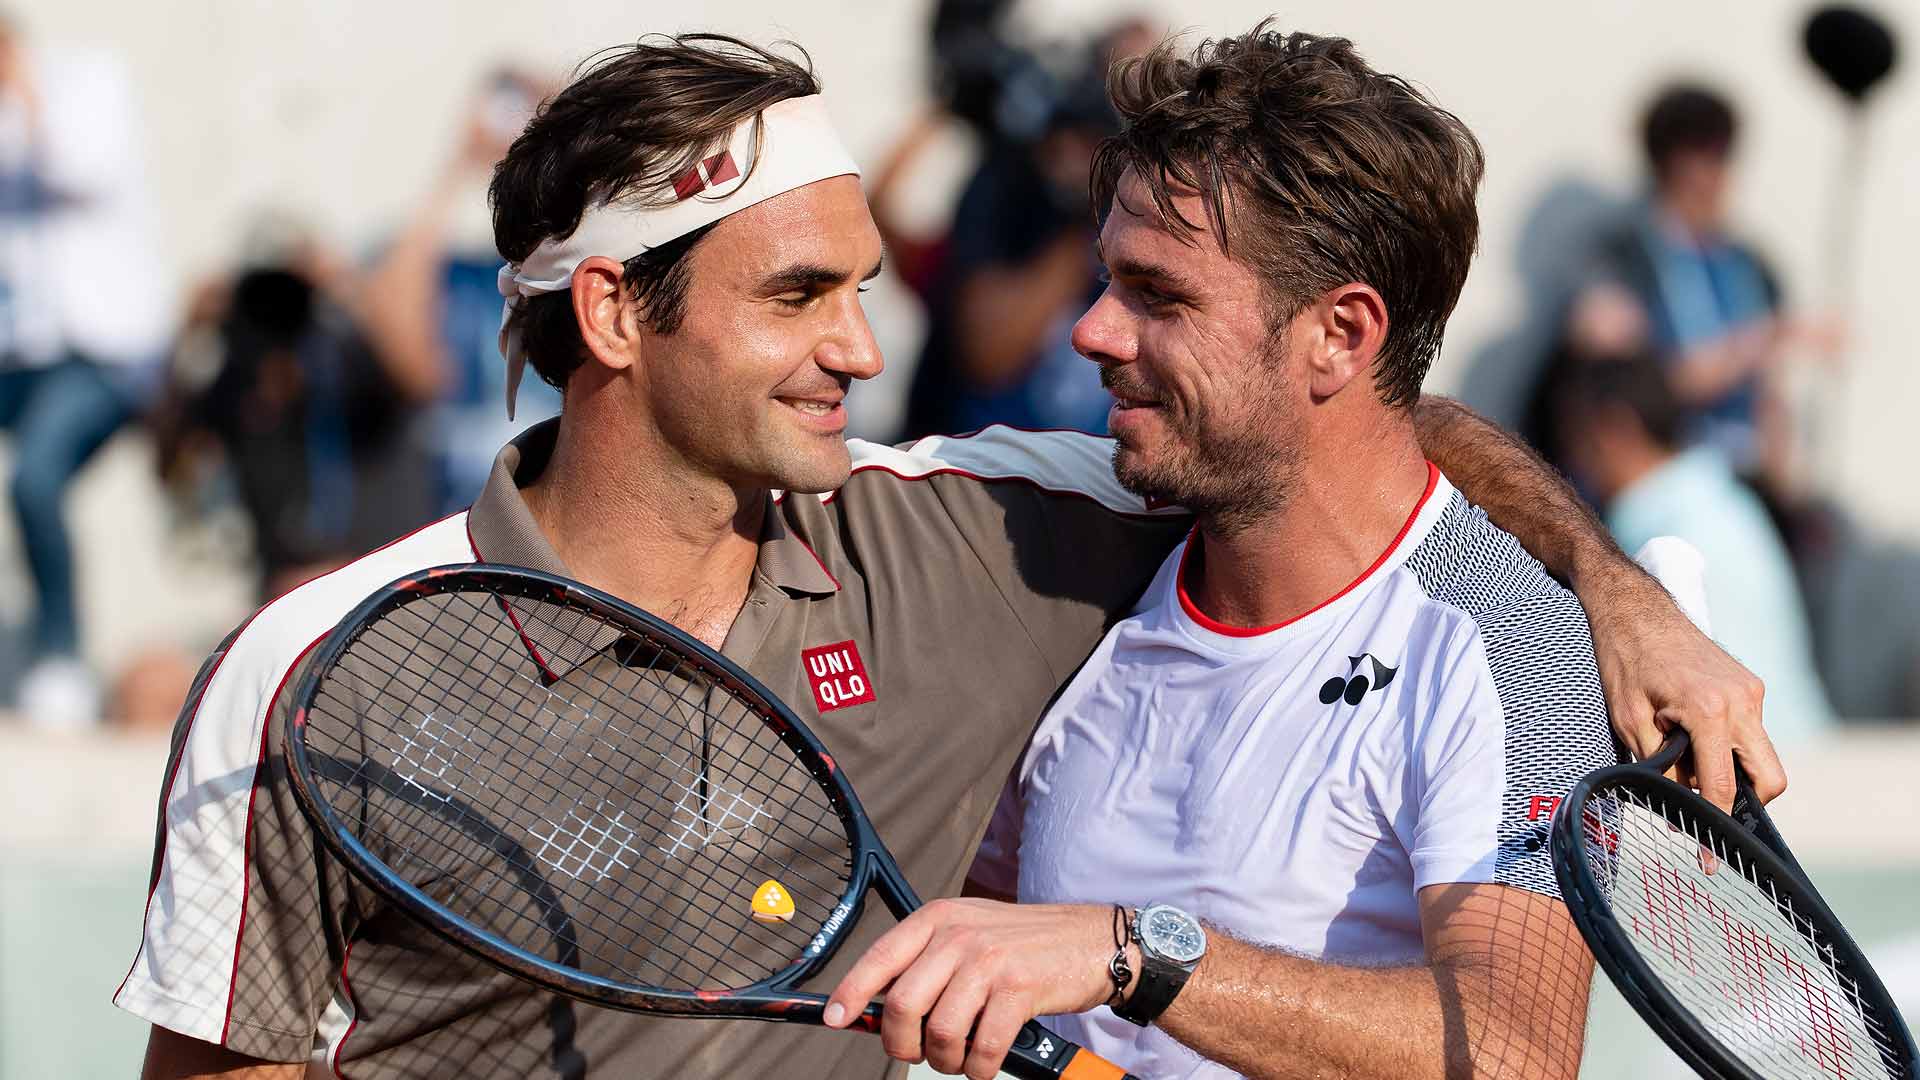 Roger Federer takes a 23-3 lead in his FedEx ATP Head2Head series with Stan Wawrinka with a four-set win in Paris.